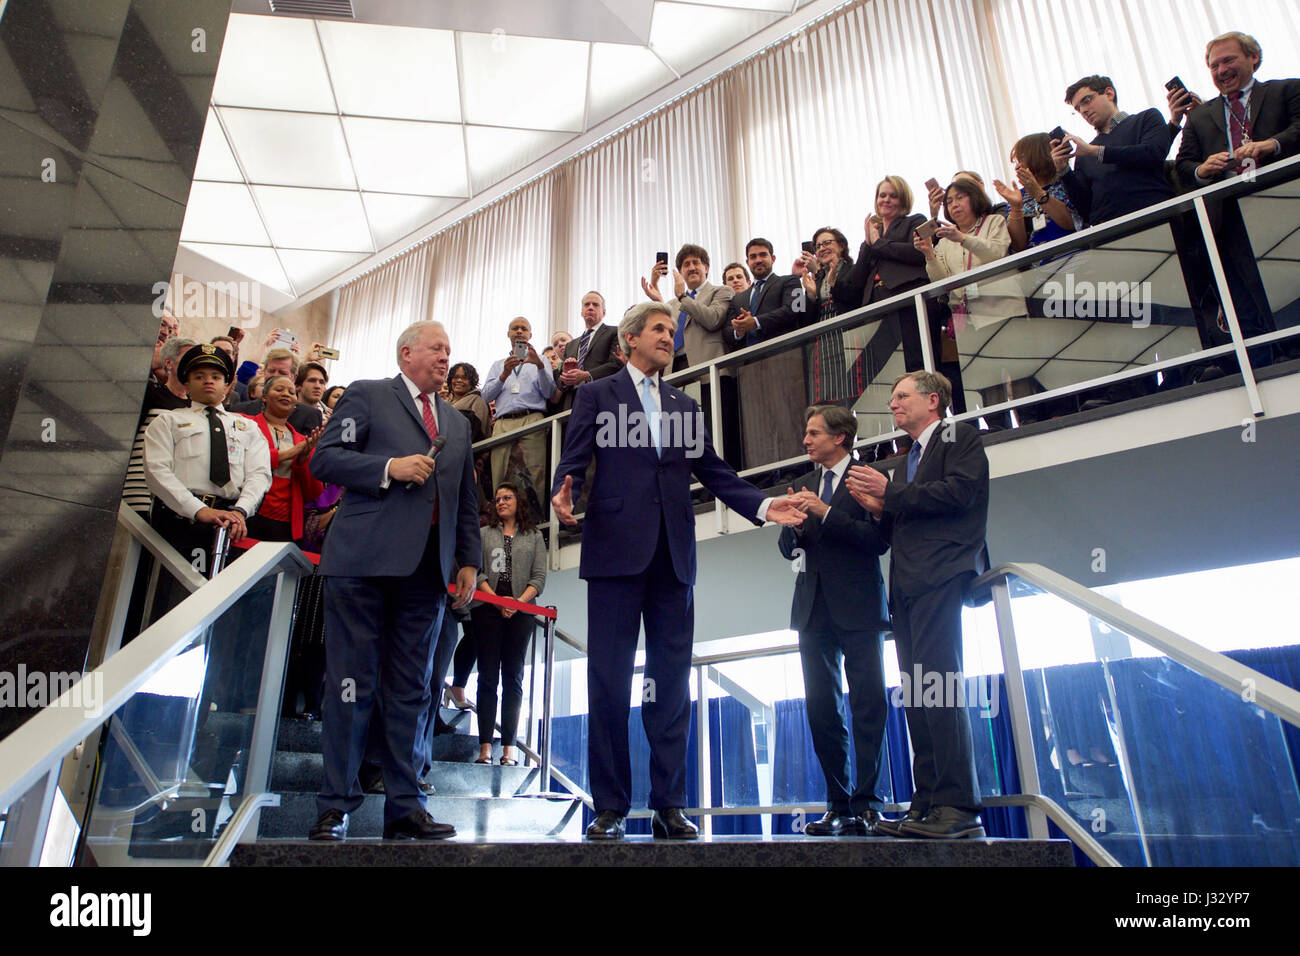 U.S. Secretary of State John Kerry acknowledges the crowd, as they gather in the main lobby of the Department's Harry S. Truman building, before delivering farewell remarks on his final day in office on January 19, 2017. Stock Photo